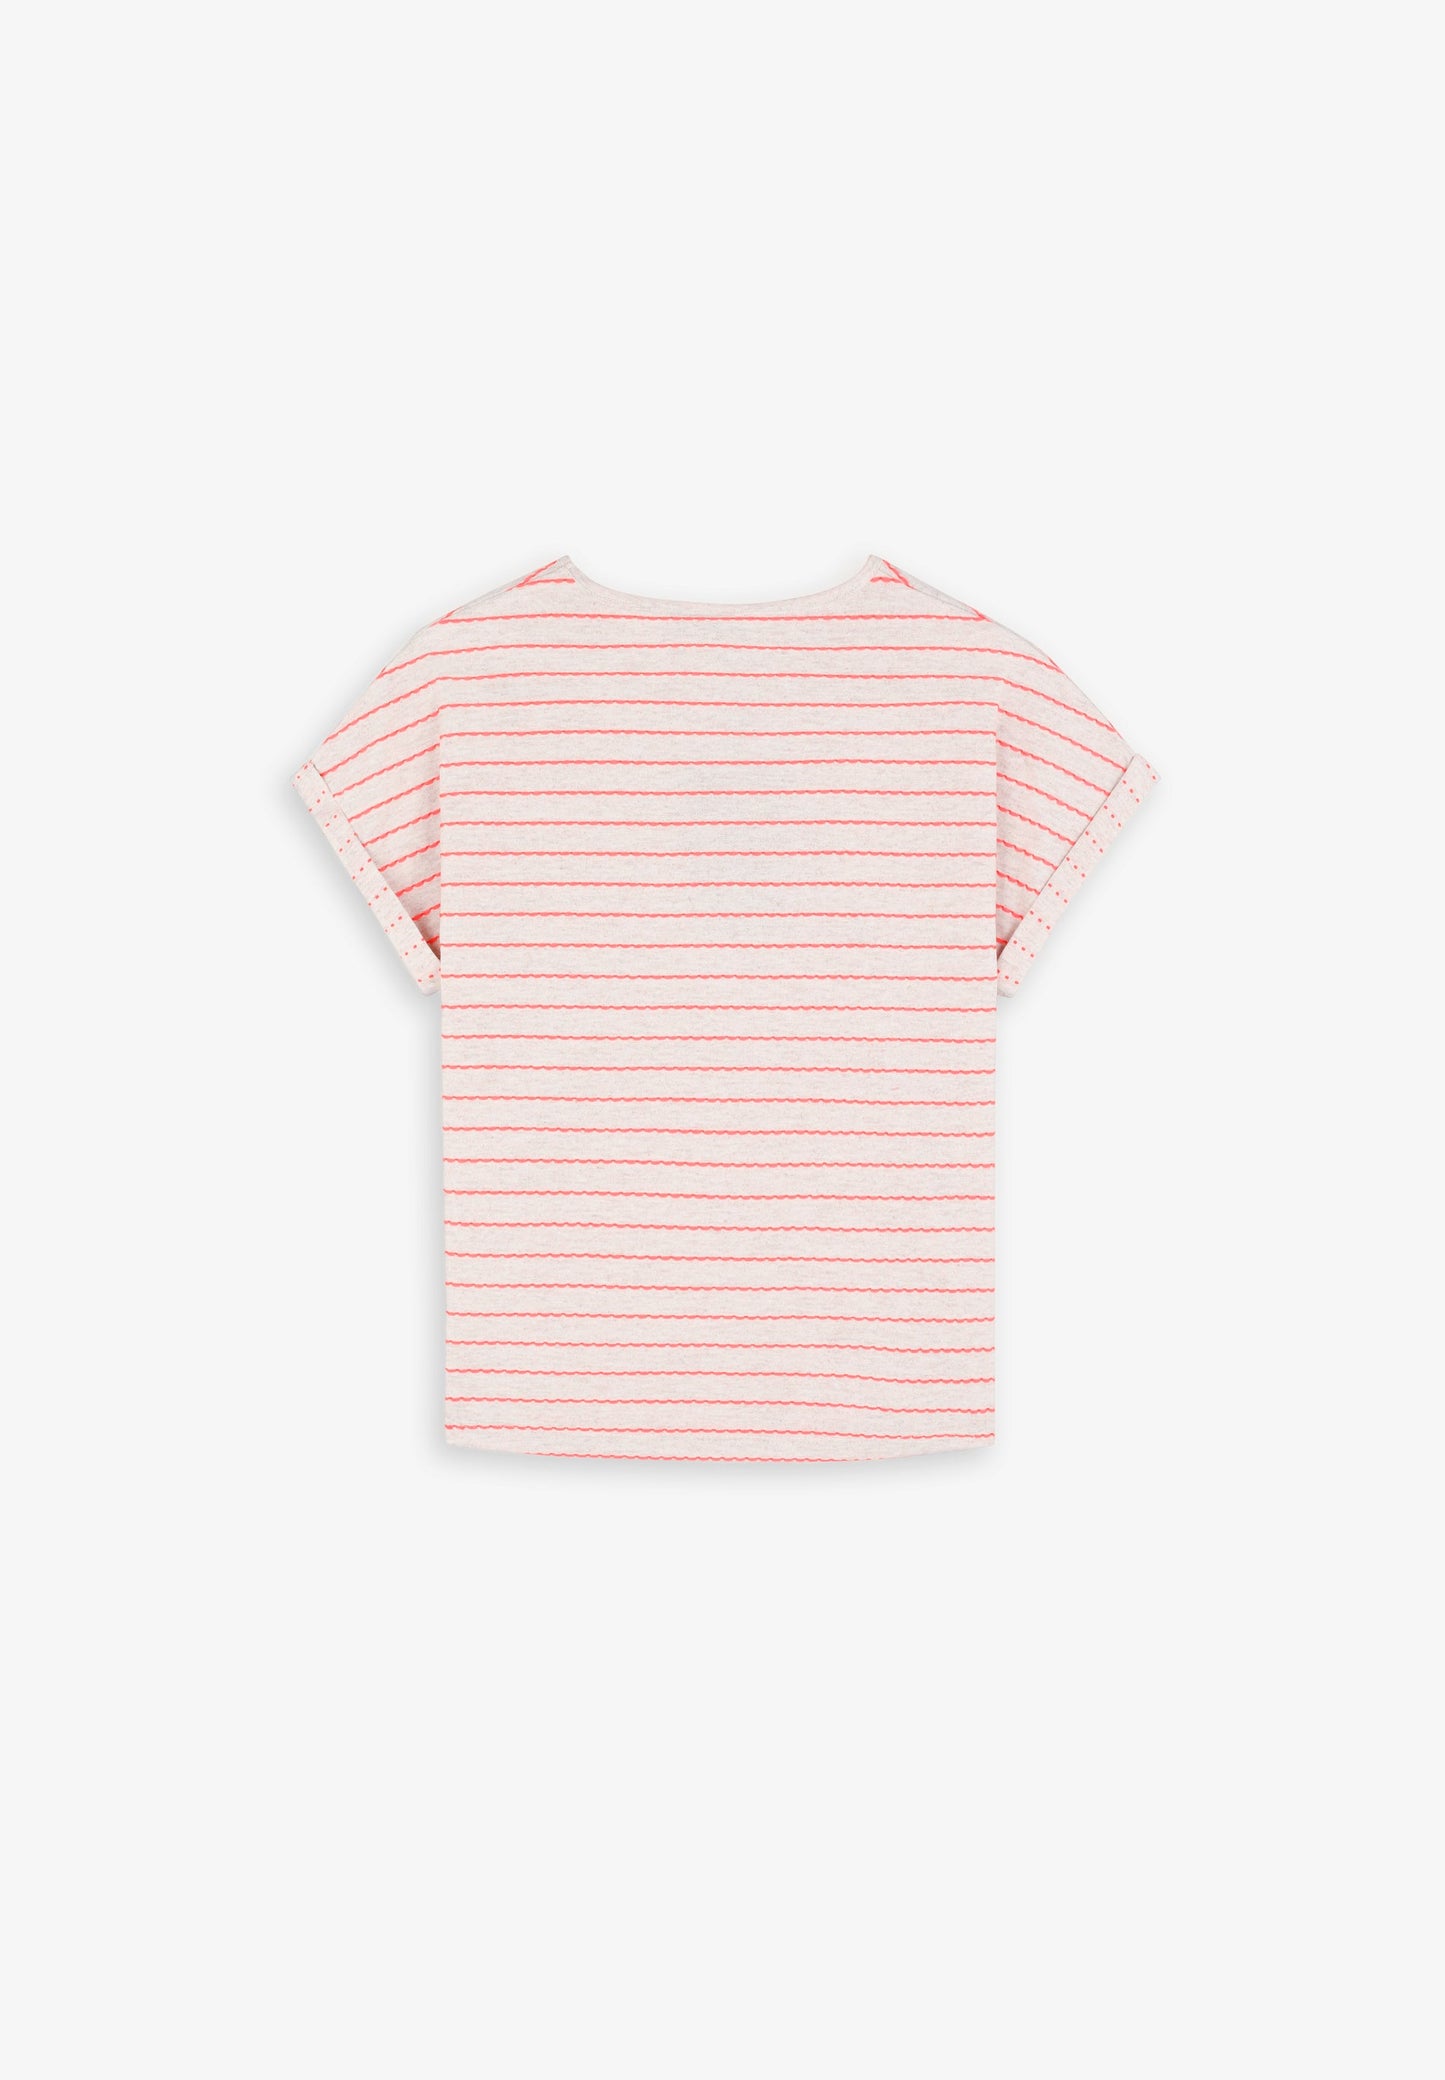 T-SHIRT WITH WOVEN NEON STRIPES